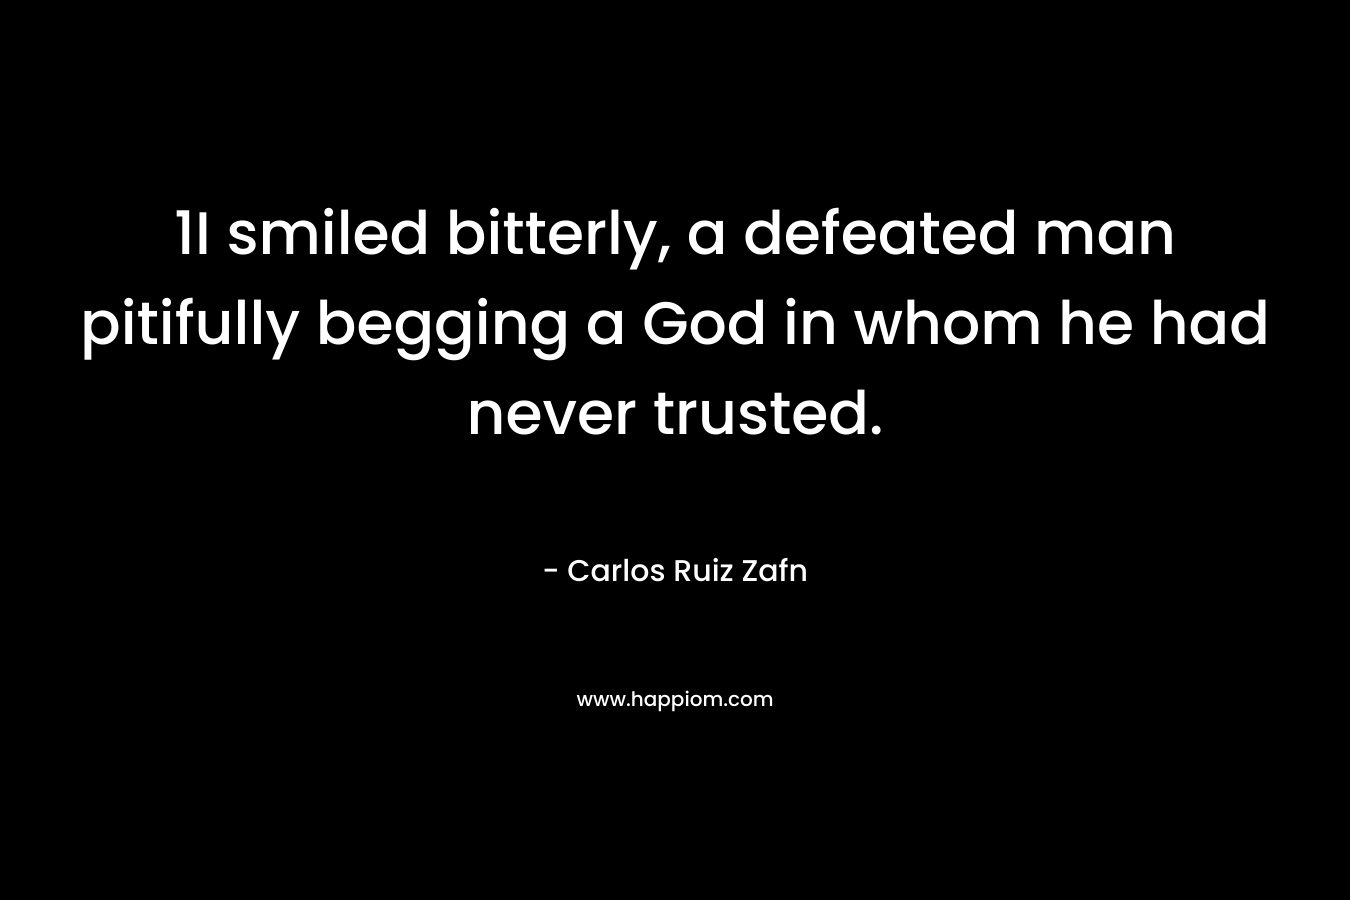 1I smiled bitterly, a defeated man pitifully begging a God in whom he had never trusted. – Carlos Ruiz Zafn